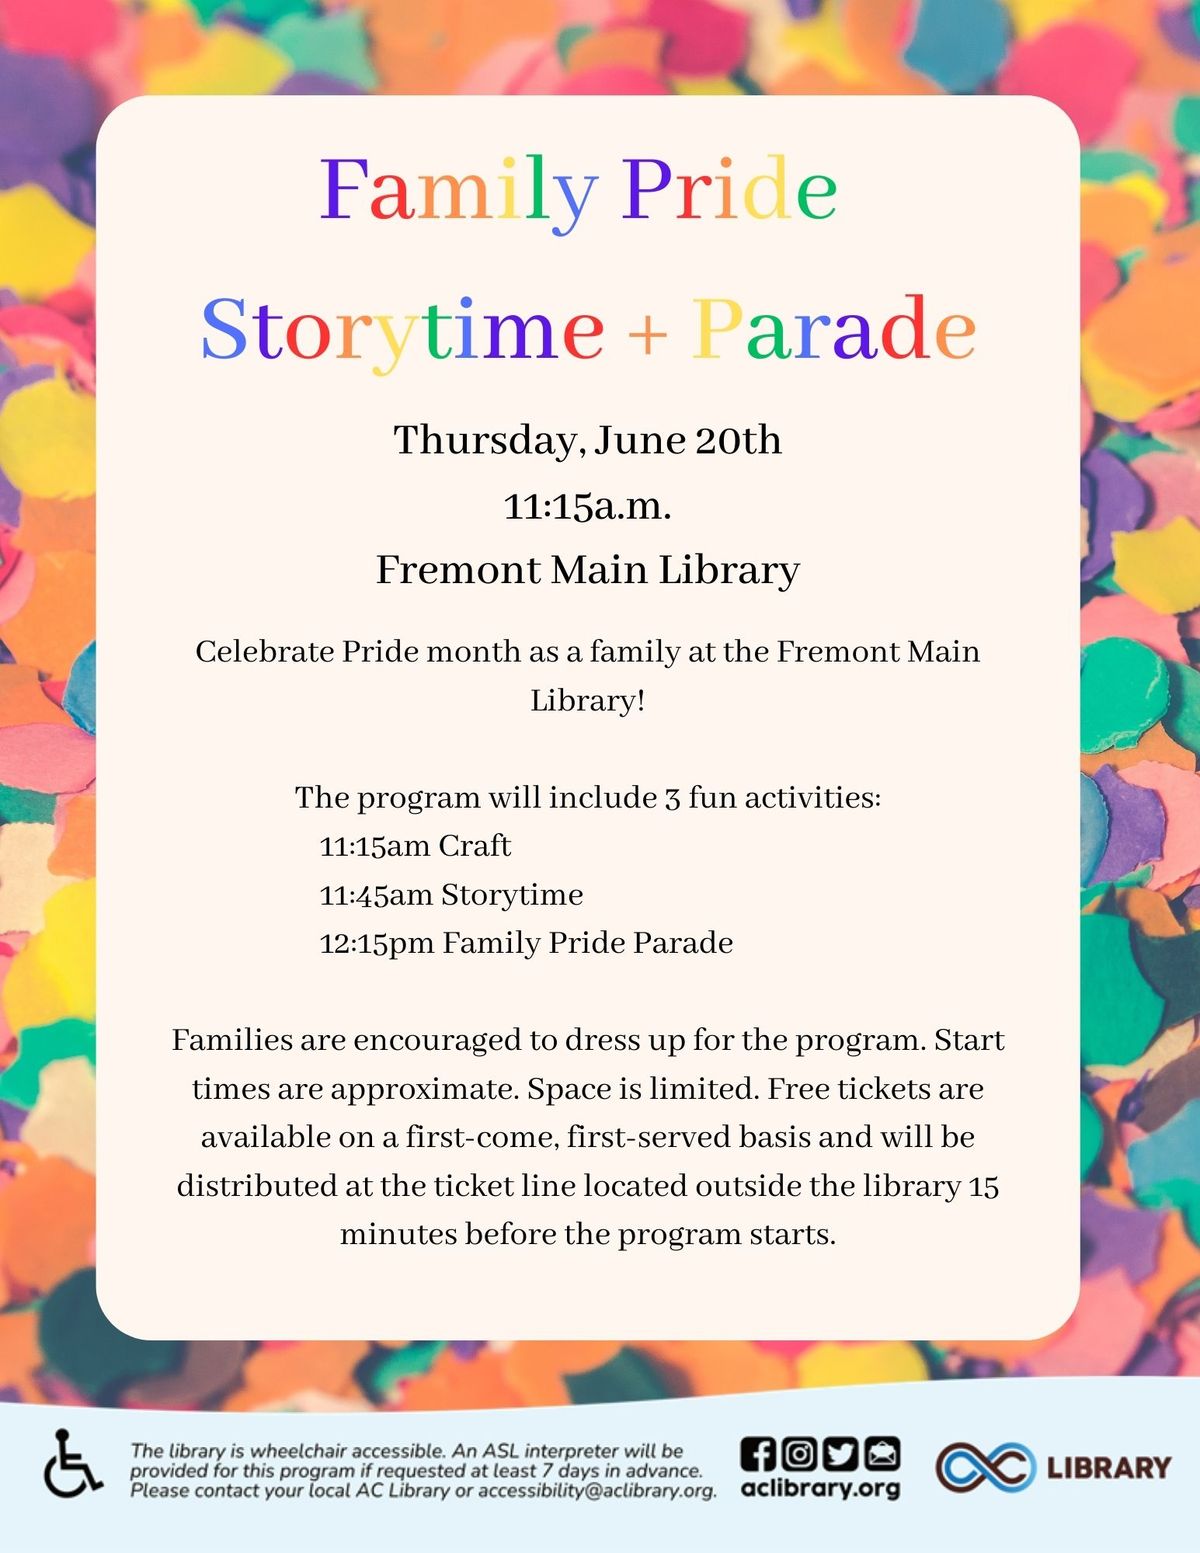 Family Pride Storytime + Parade @ Fremont Main Library